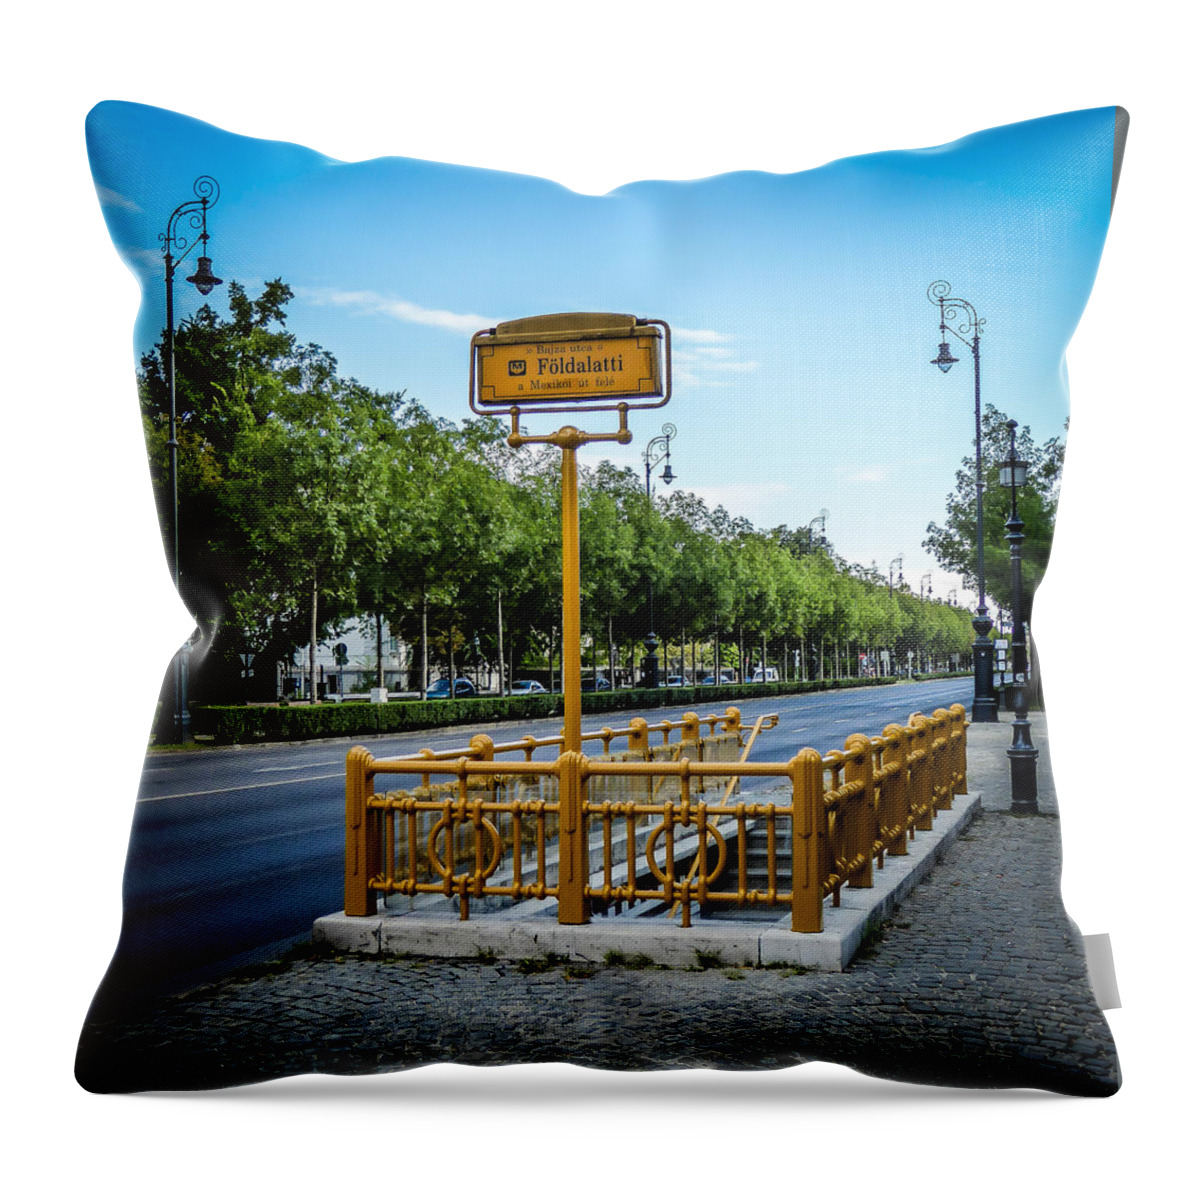 Budapest Throw Pillow featuring the photograph Budapest Metro by Pamela Newcomb